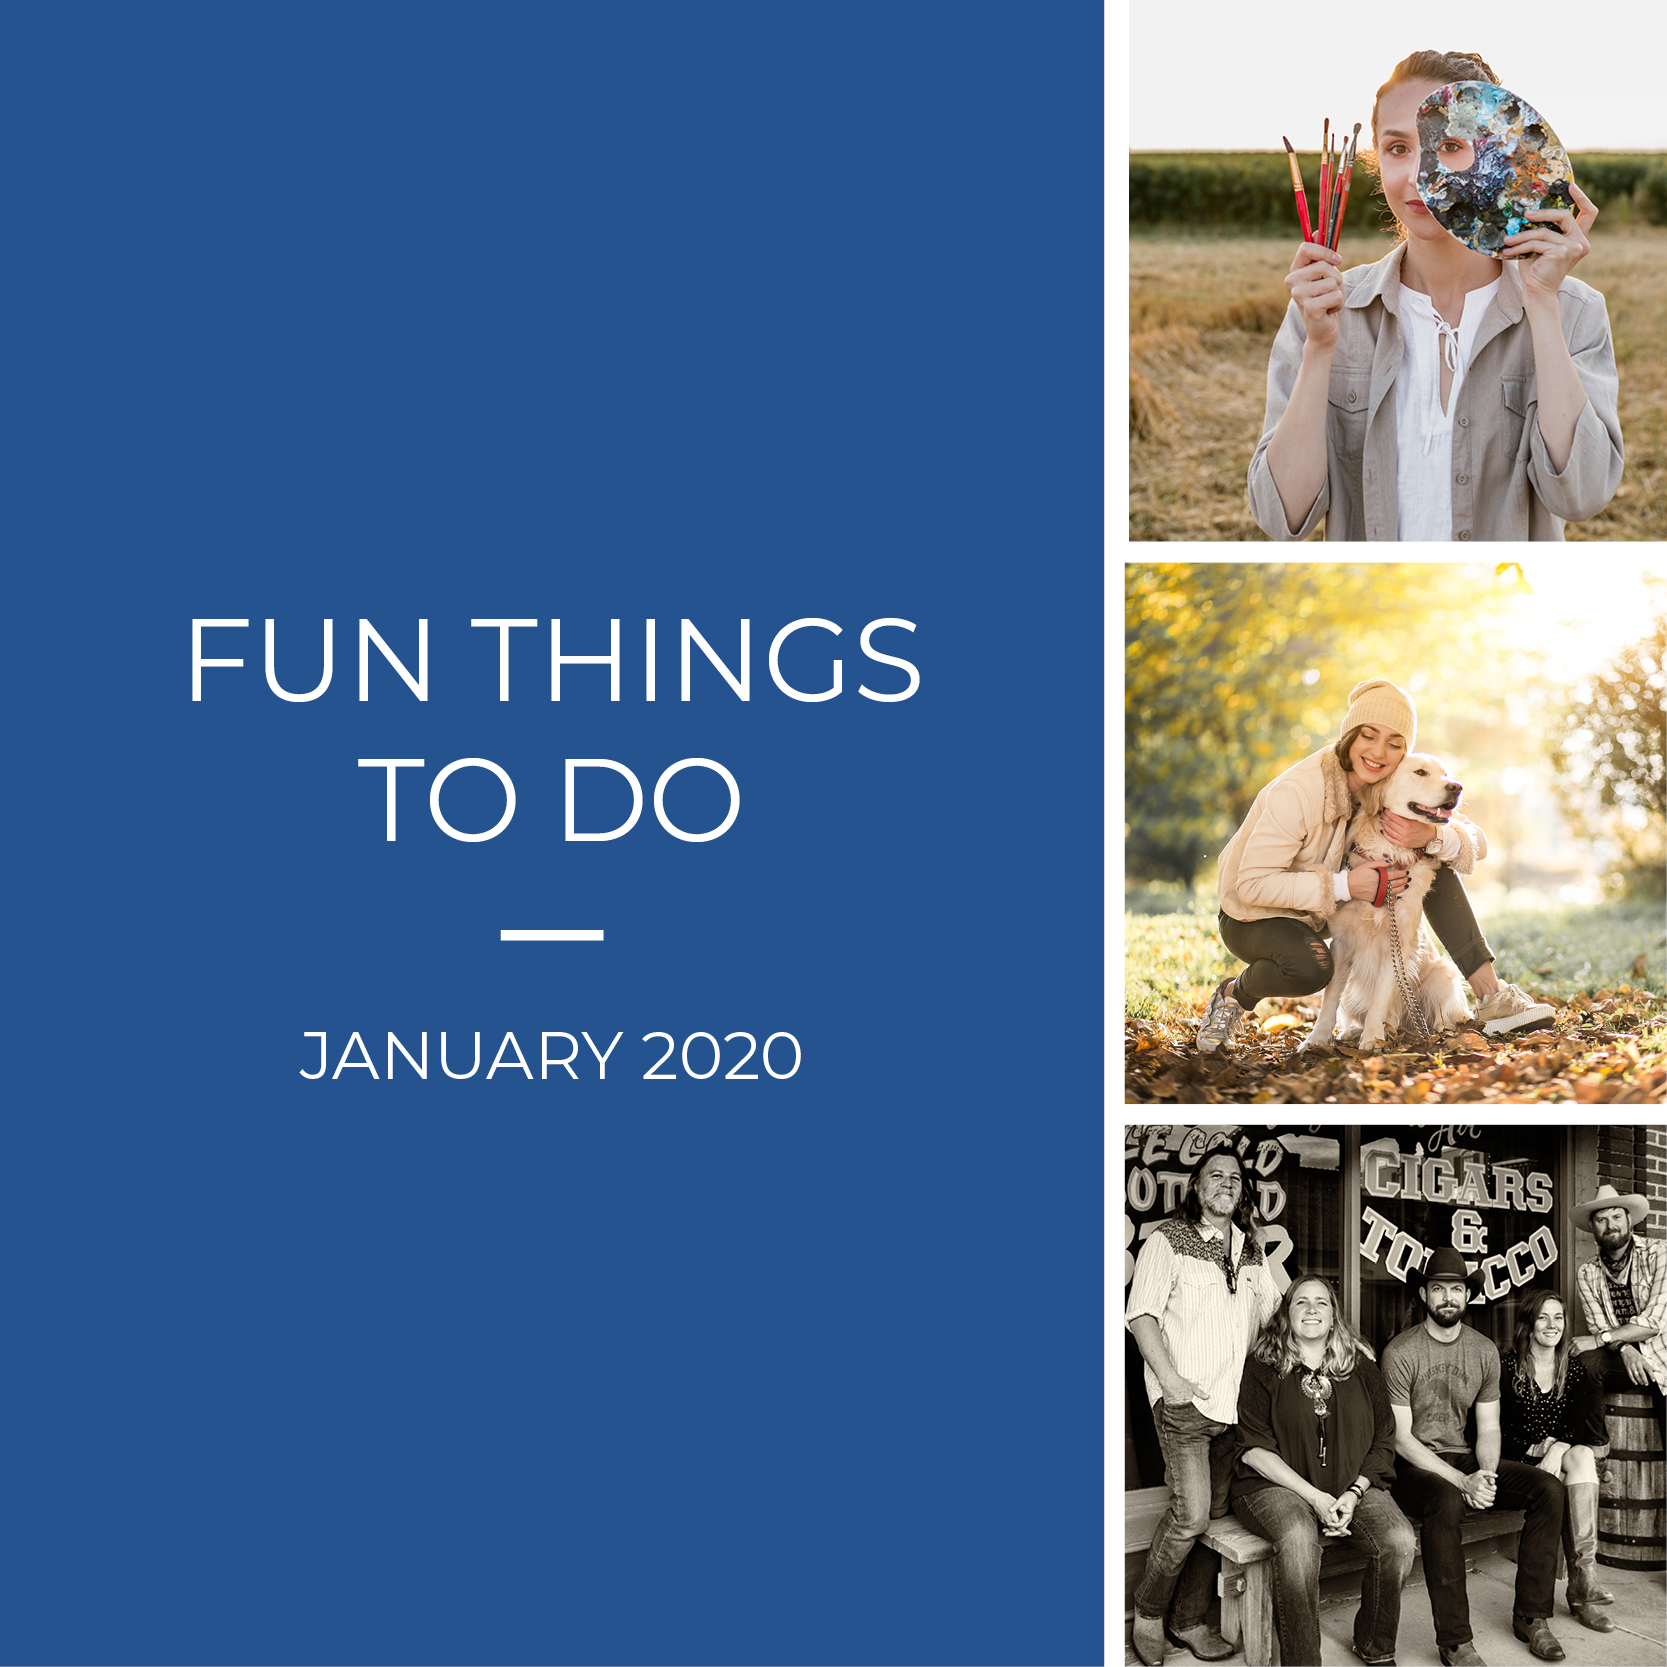 Fun Things to Do in January: Jam Out in January